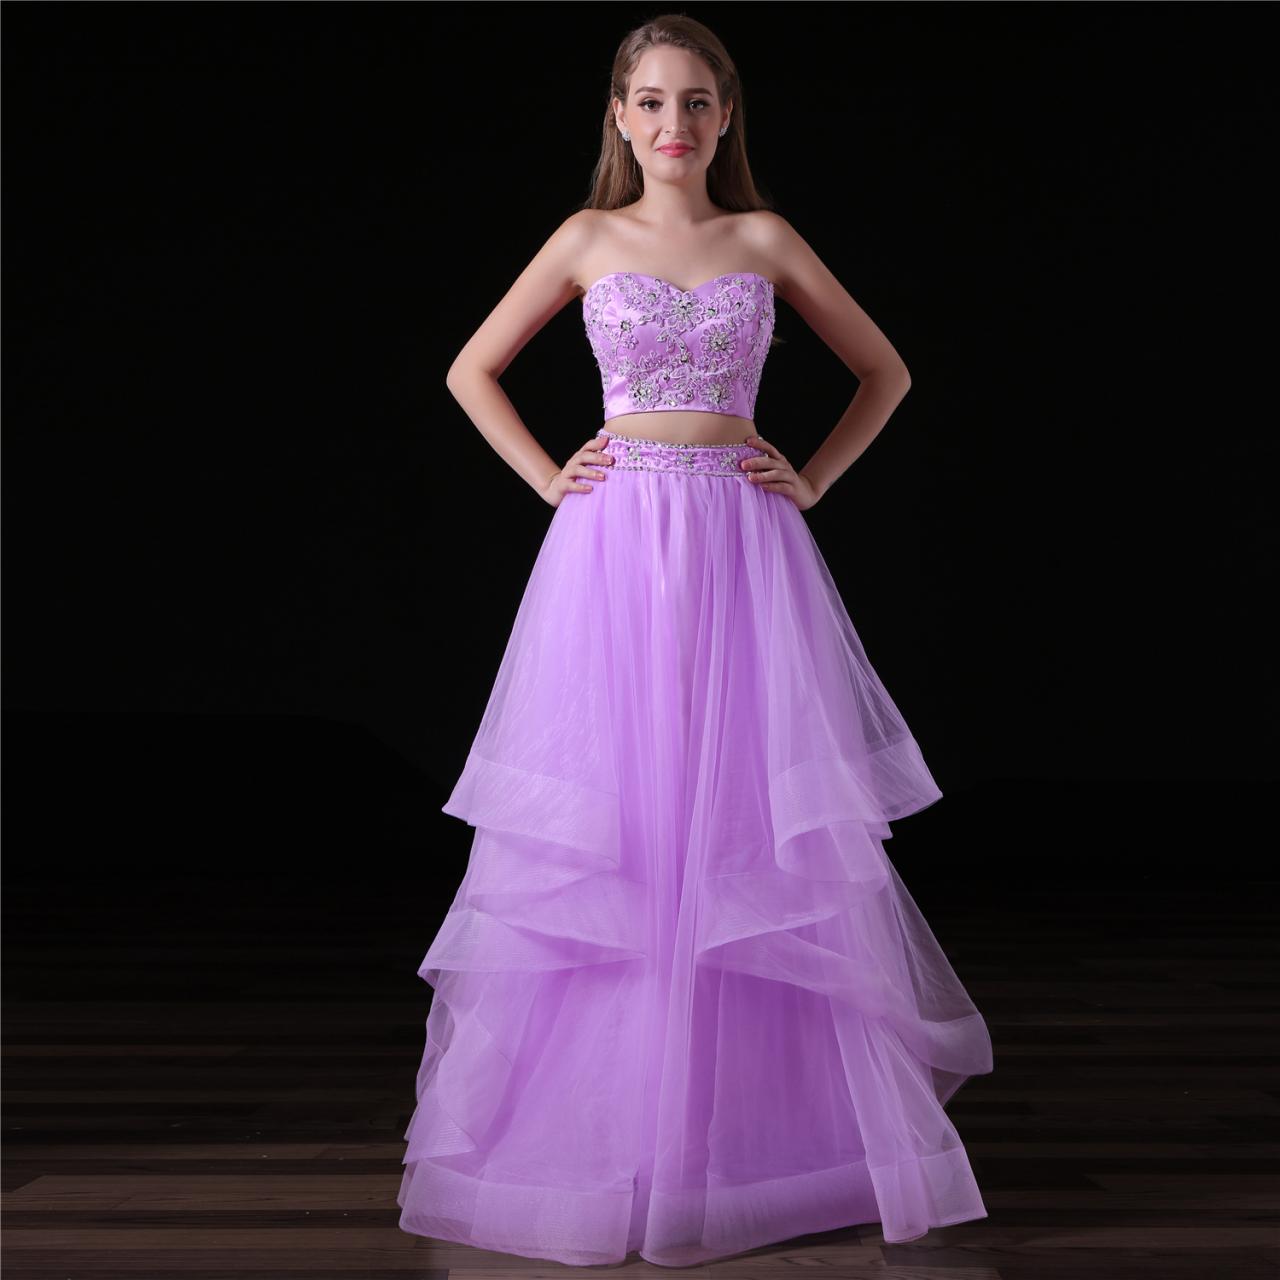 Sexy Long Two Piece Prom Dresses Featuring Lace Applique Sweetheart Neckline, Long A Line Tulle Evening Gowns